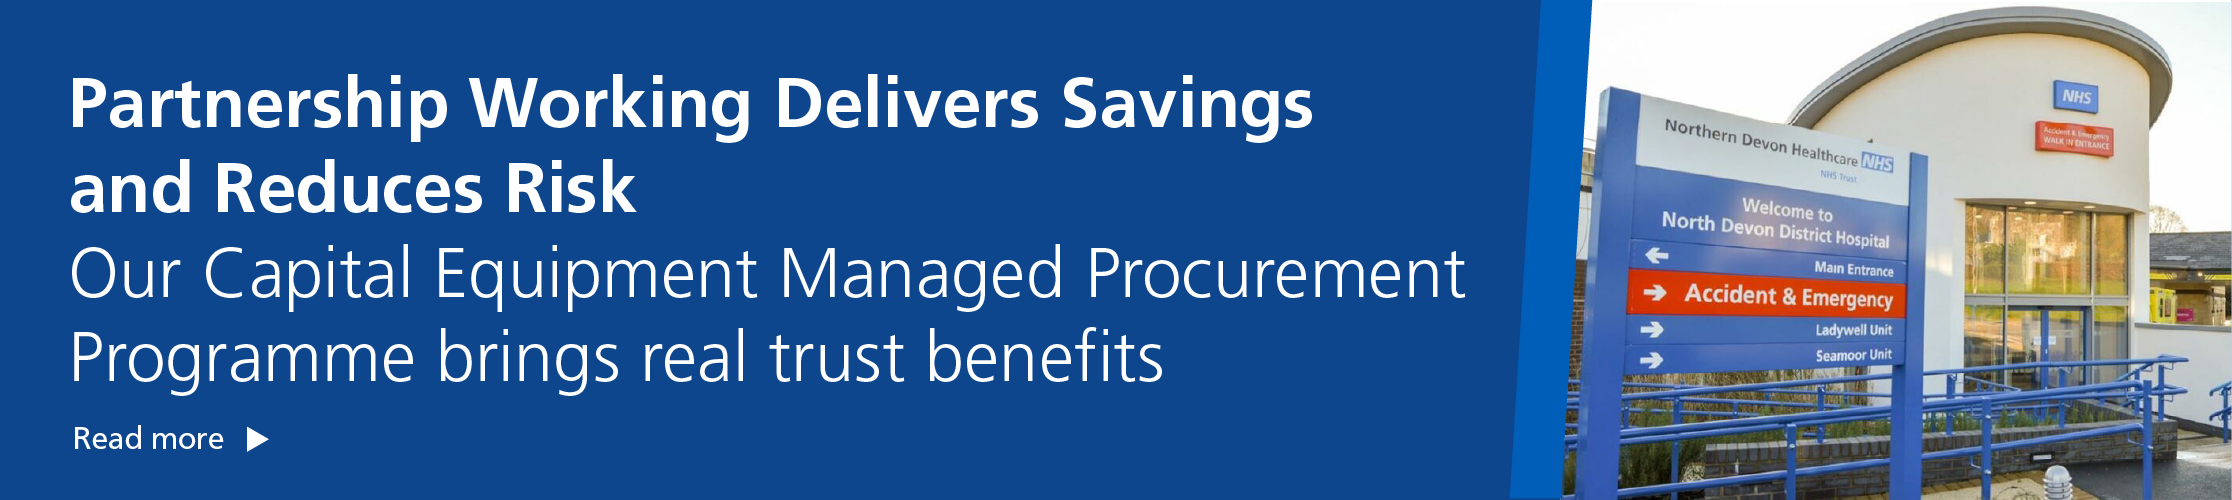 Read more about how our Capital Equipment Managed Procurement Programme brings real trust benefits